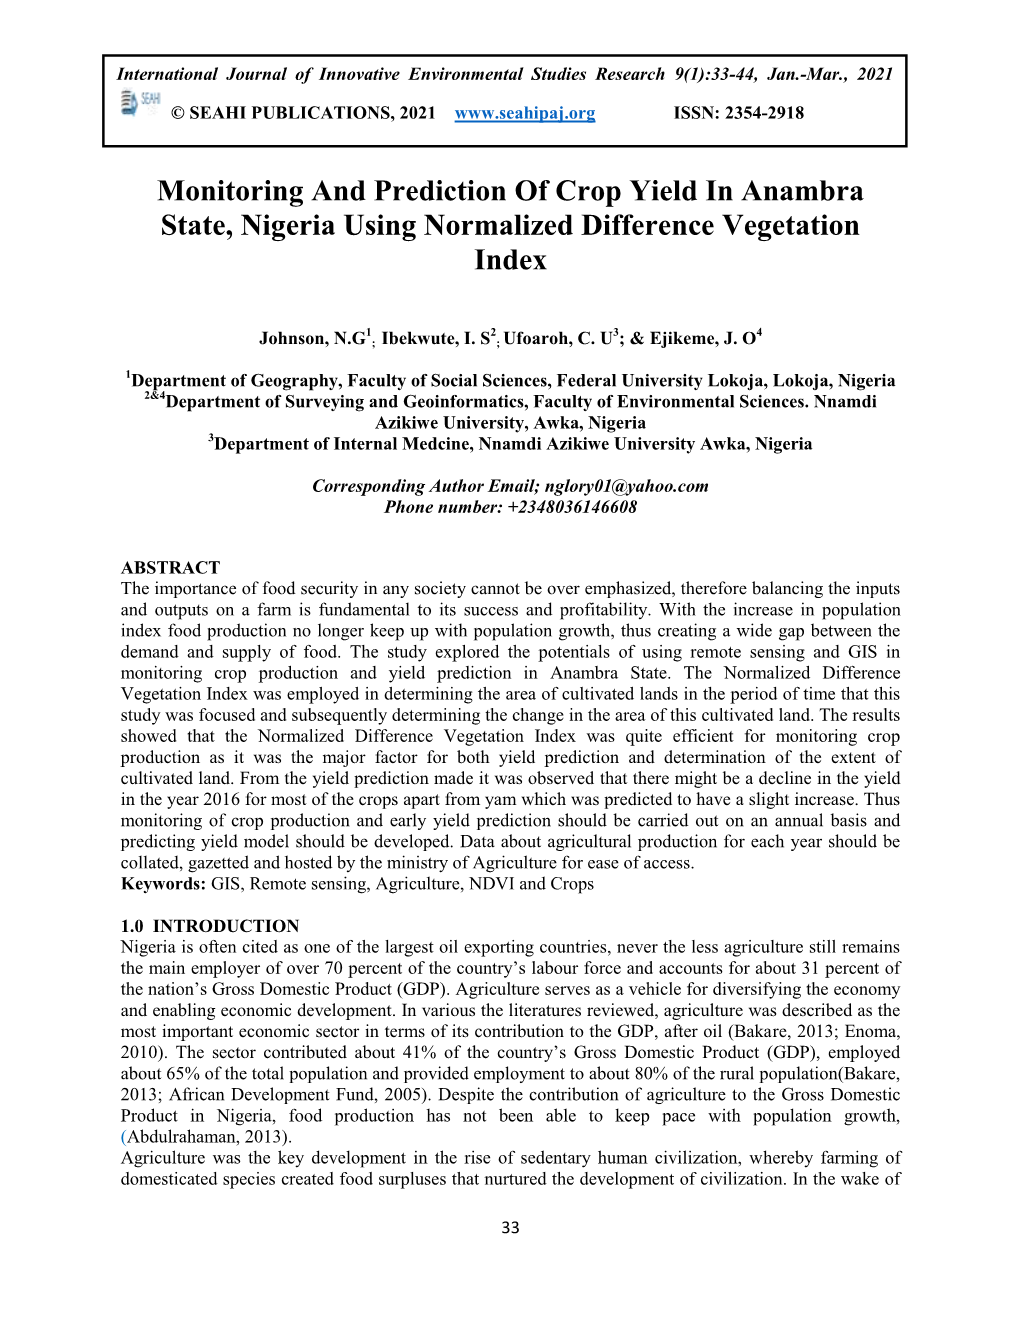 Monitoring and Prediction of Crop Yield in Anambra State, Nigeria Using Normalized Difference Vegetation Index